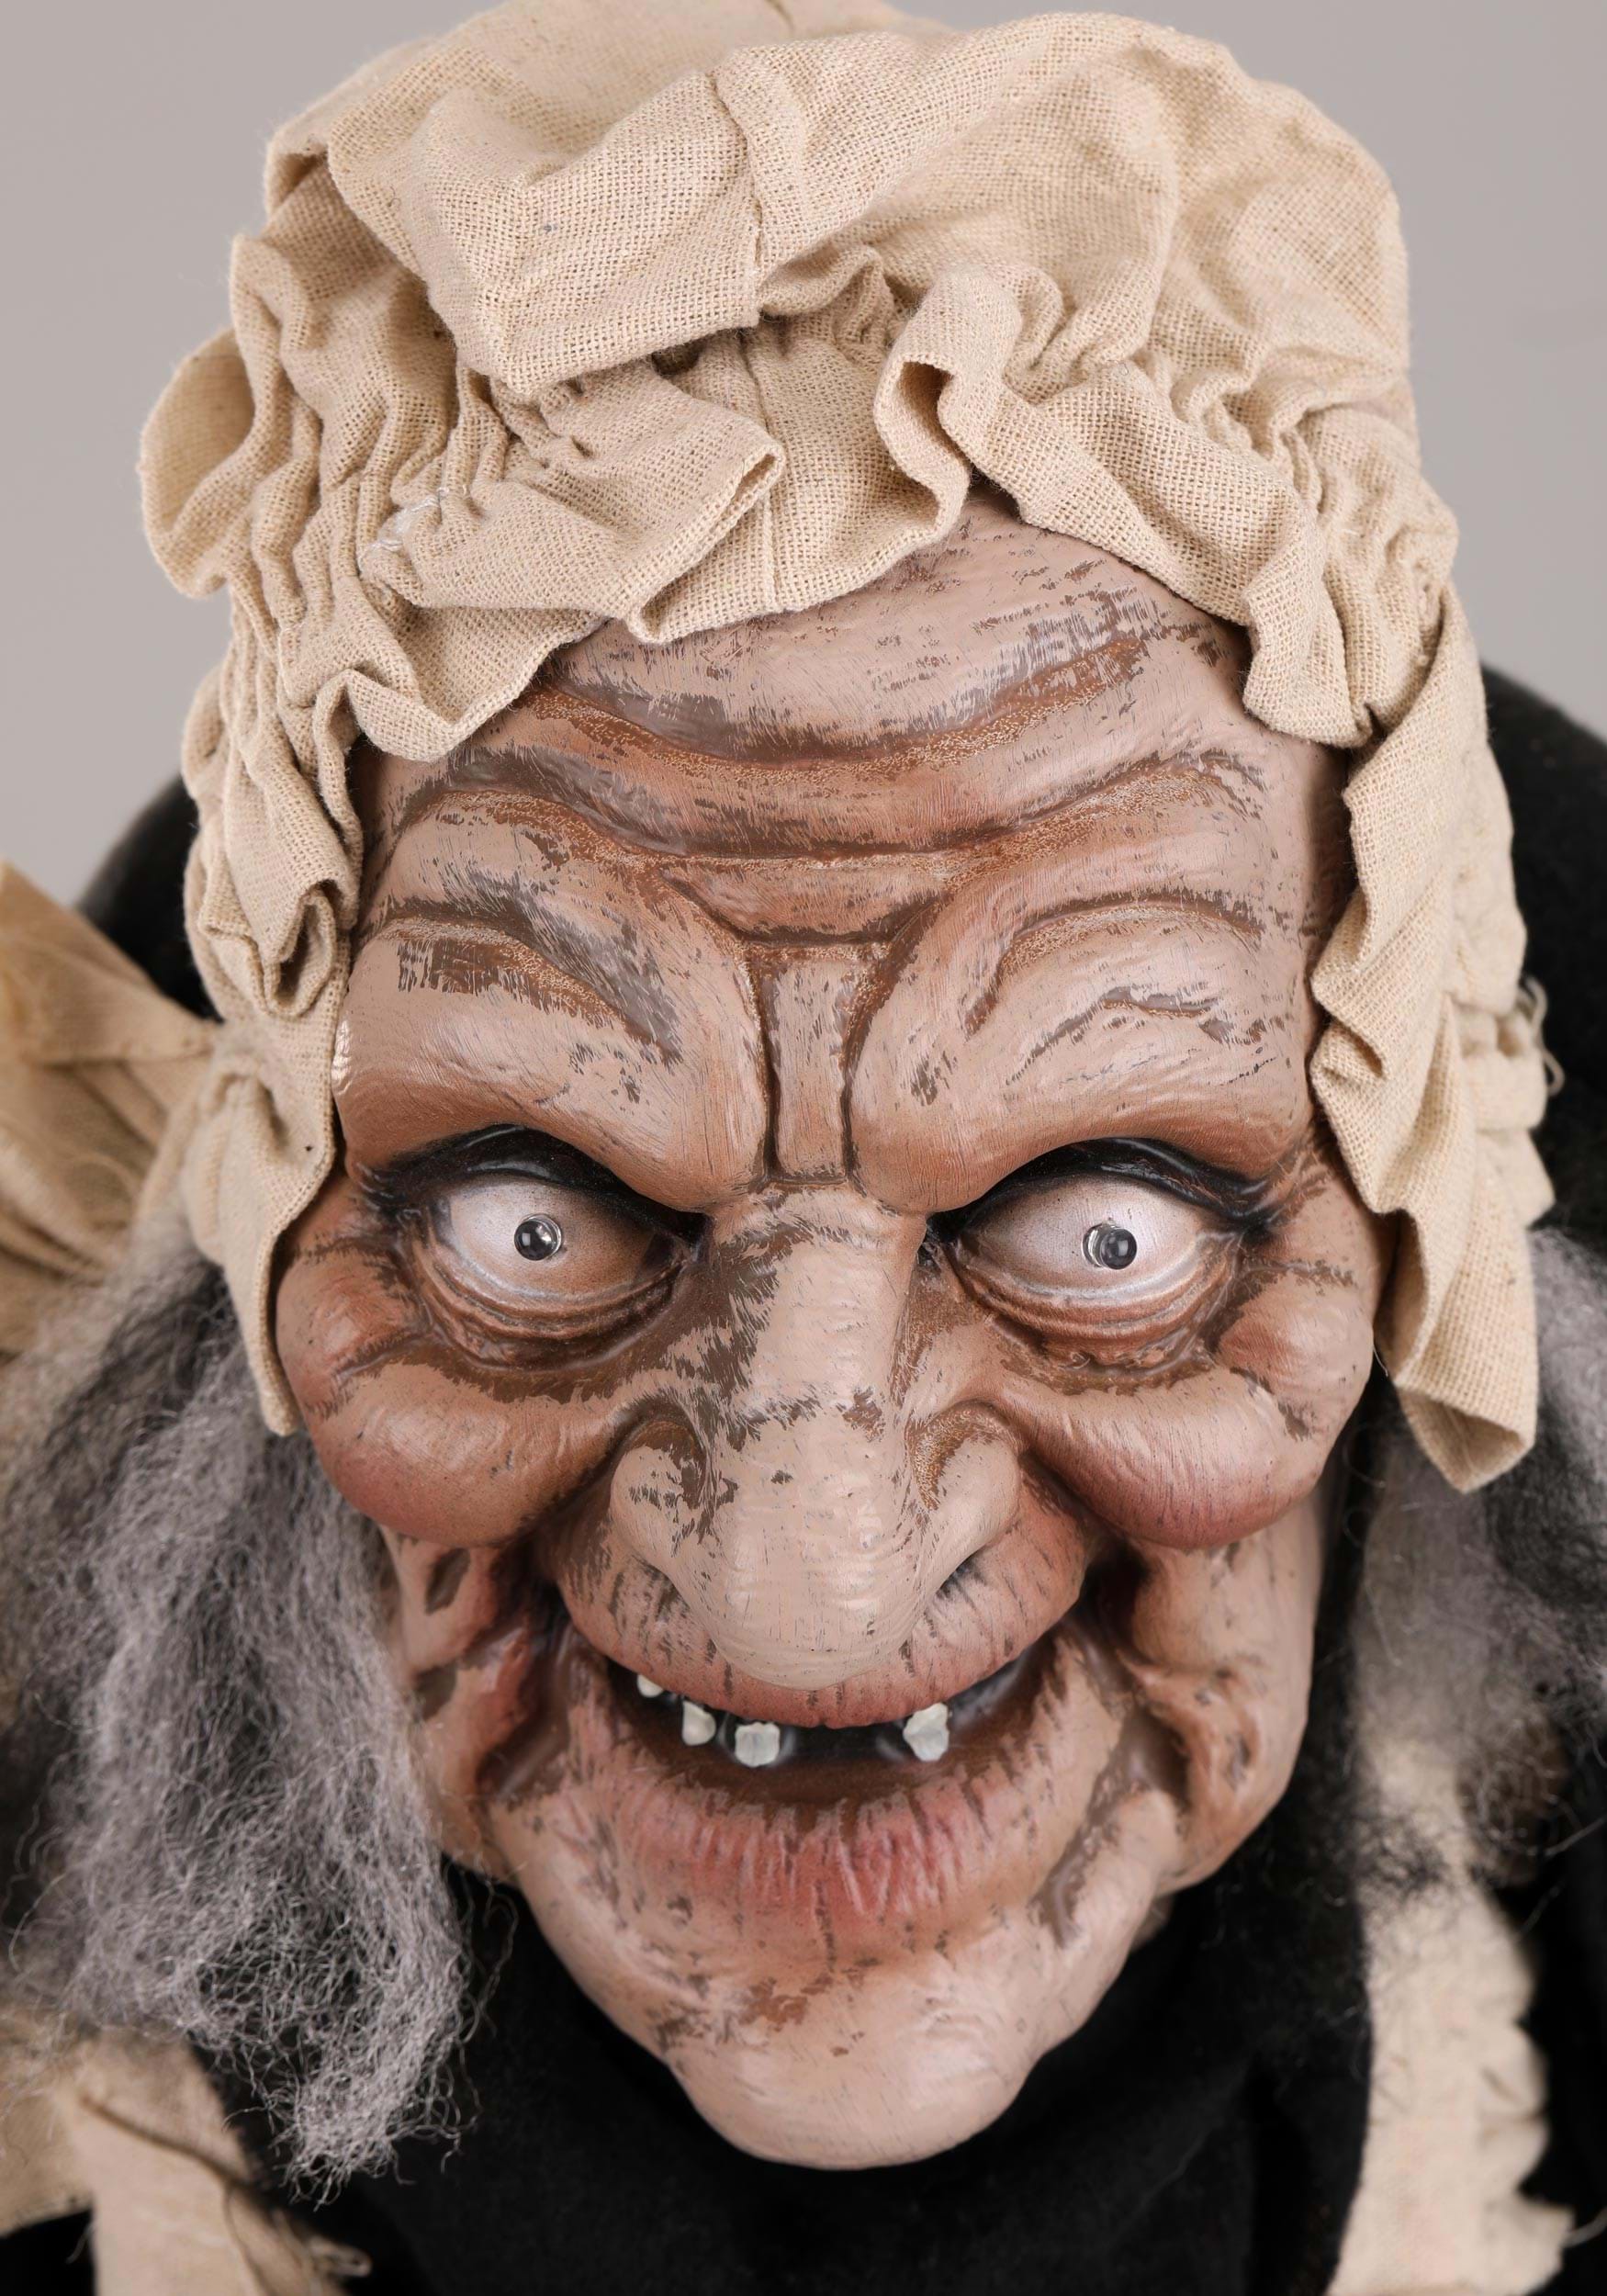 Animated 5FT Greeter Old Lady Hag Halloween Decoration